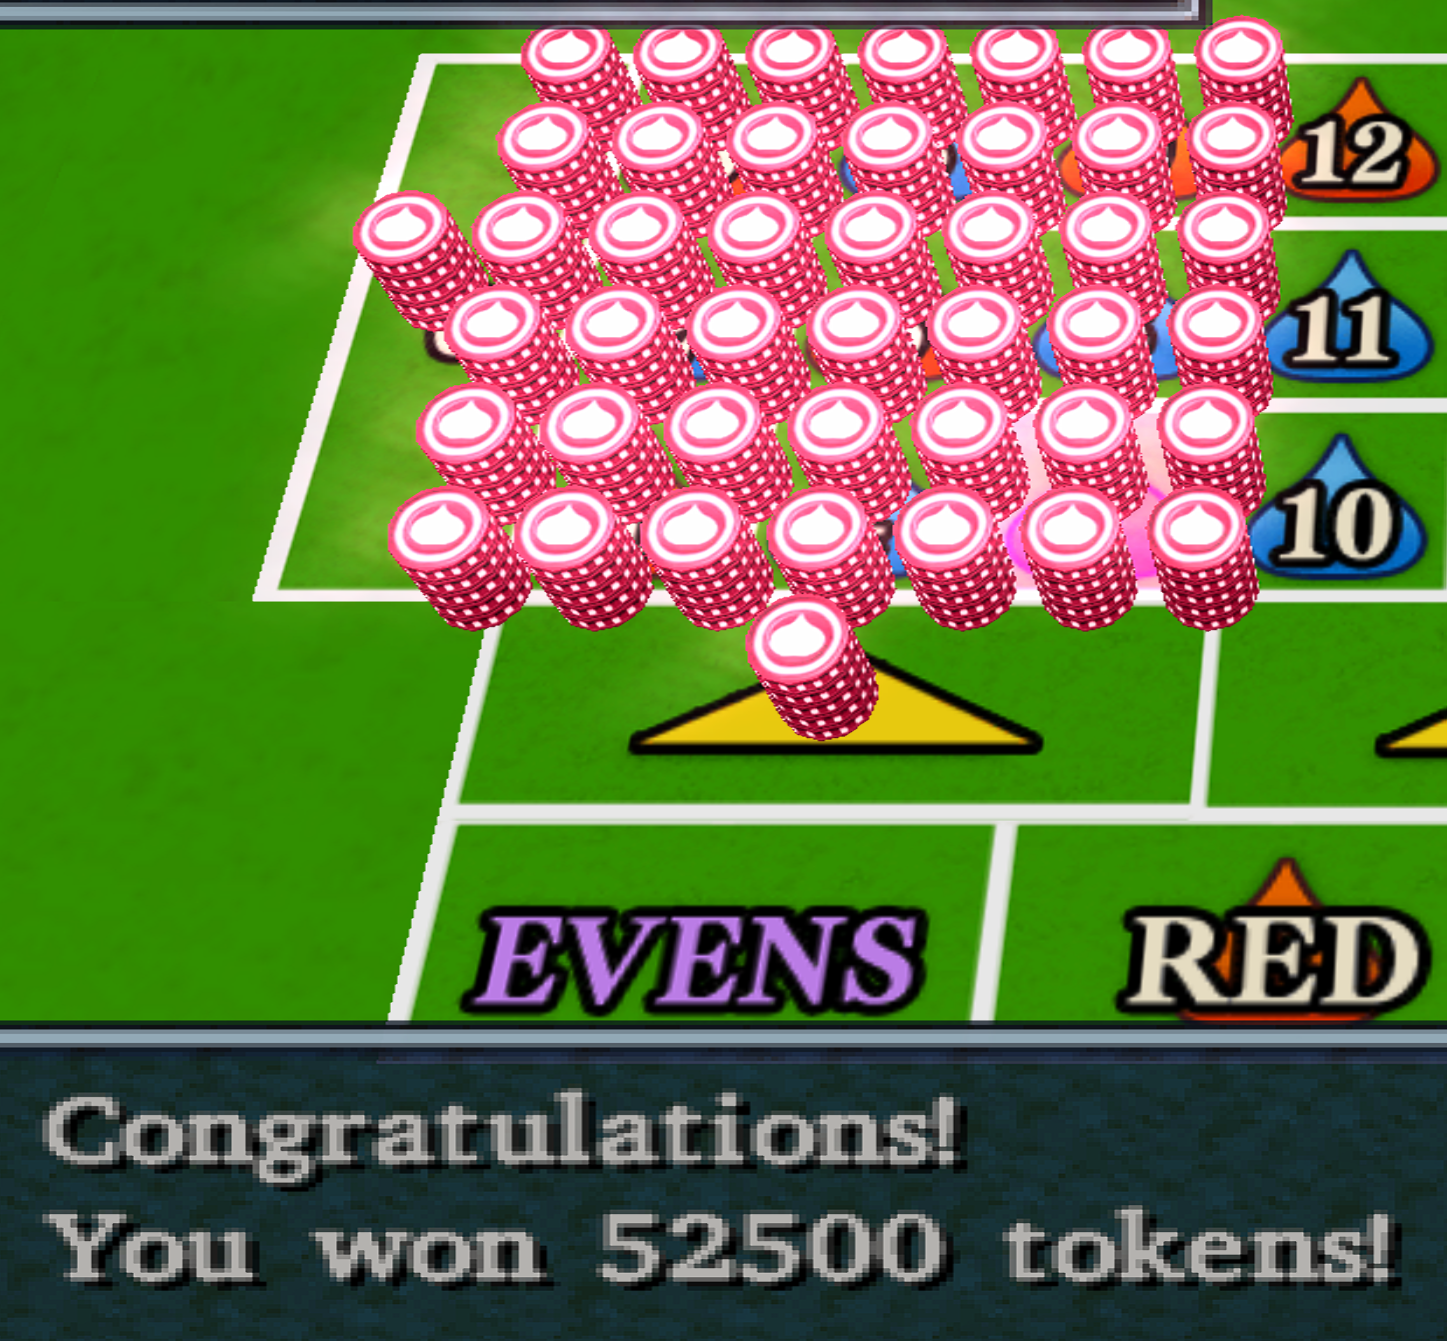 Roulette table with 22000 tokens on all available spaces from 0-9, with the number 7 highlighted for winning. A caption states "Congratulations! You won 52500 tokens!"